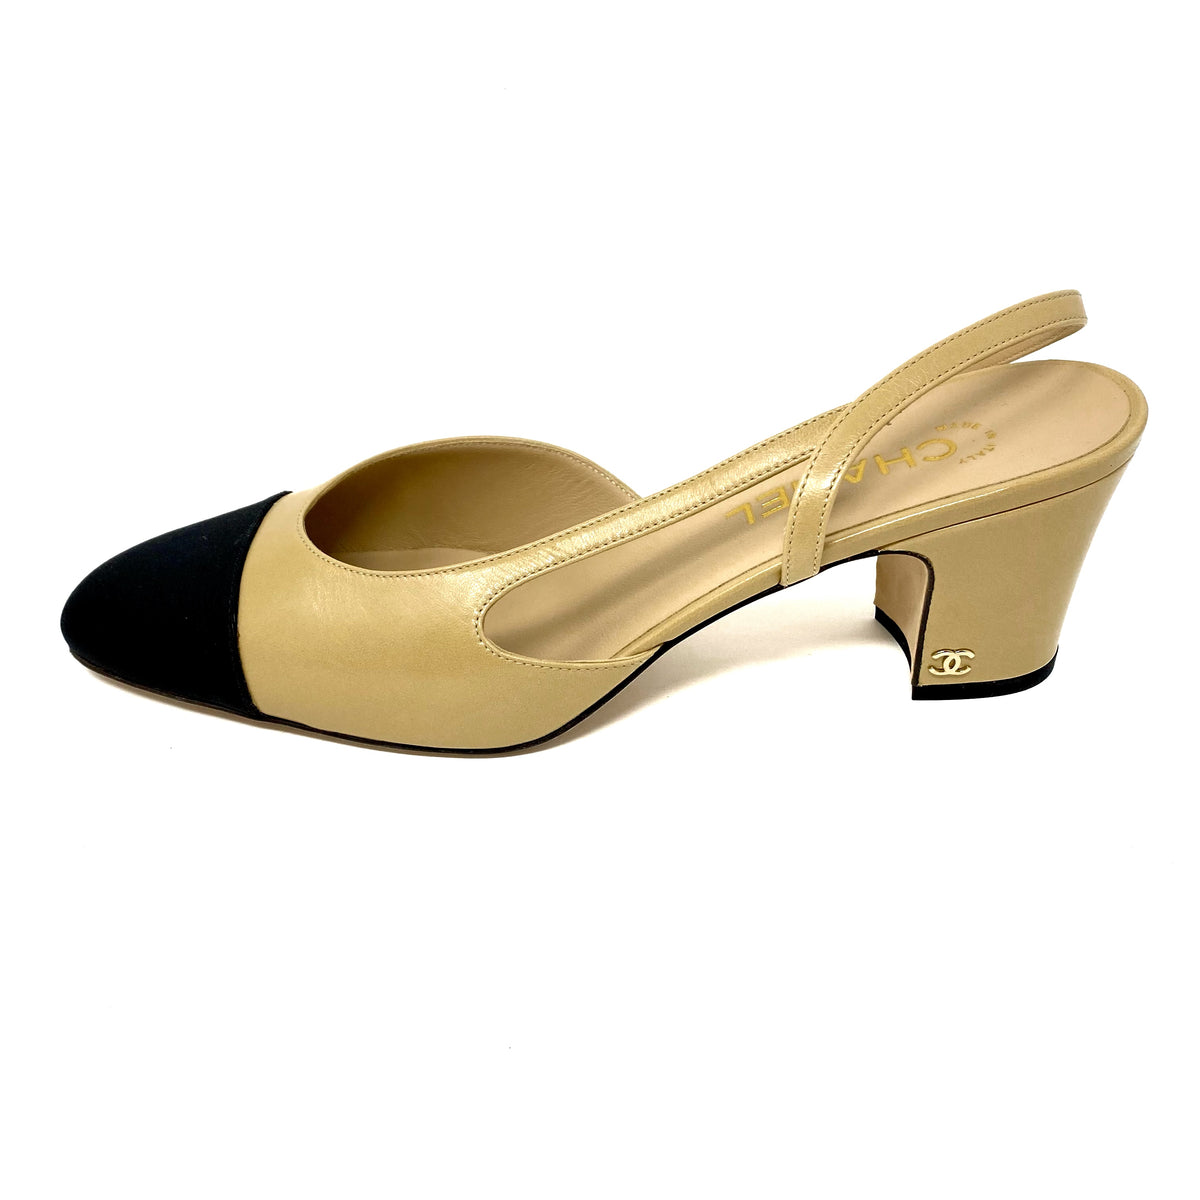 Chanel 22S G31318 Two-tone Slingback Heel Pumps 37-40 EUR sizes